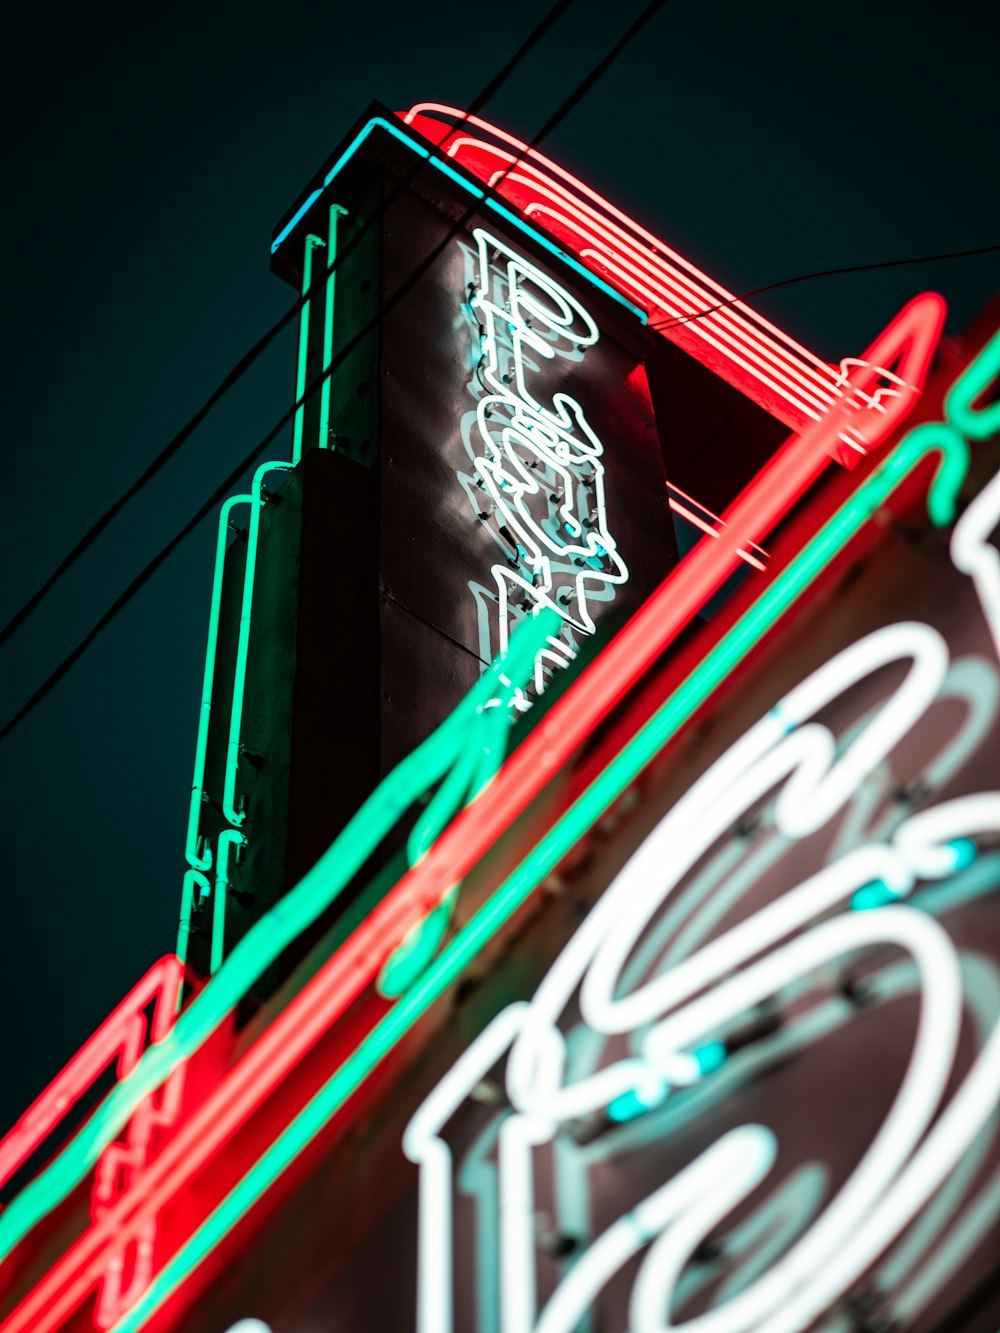 a neon sign is lit up on the side of a building